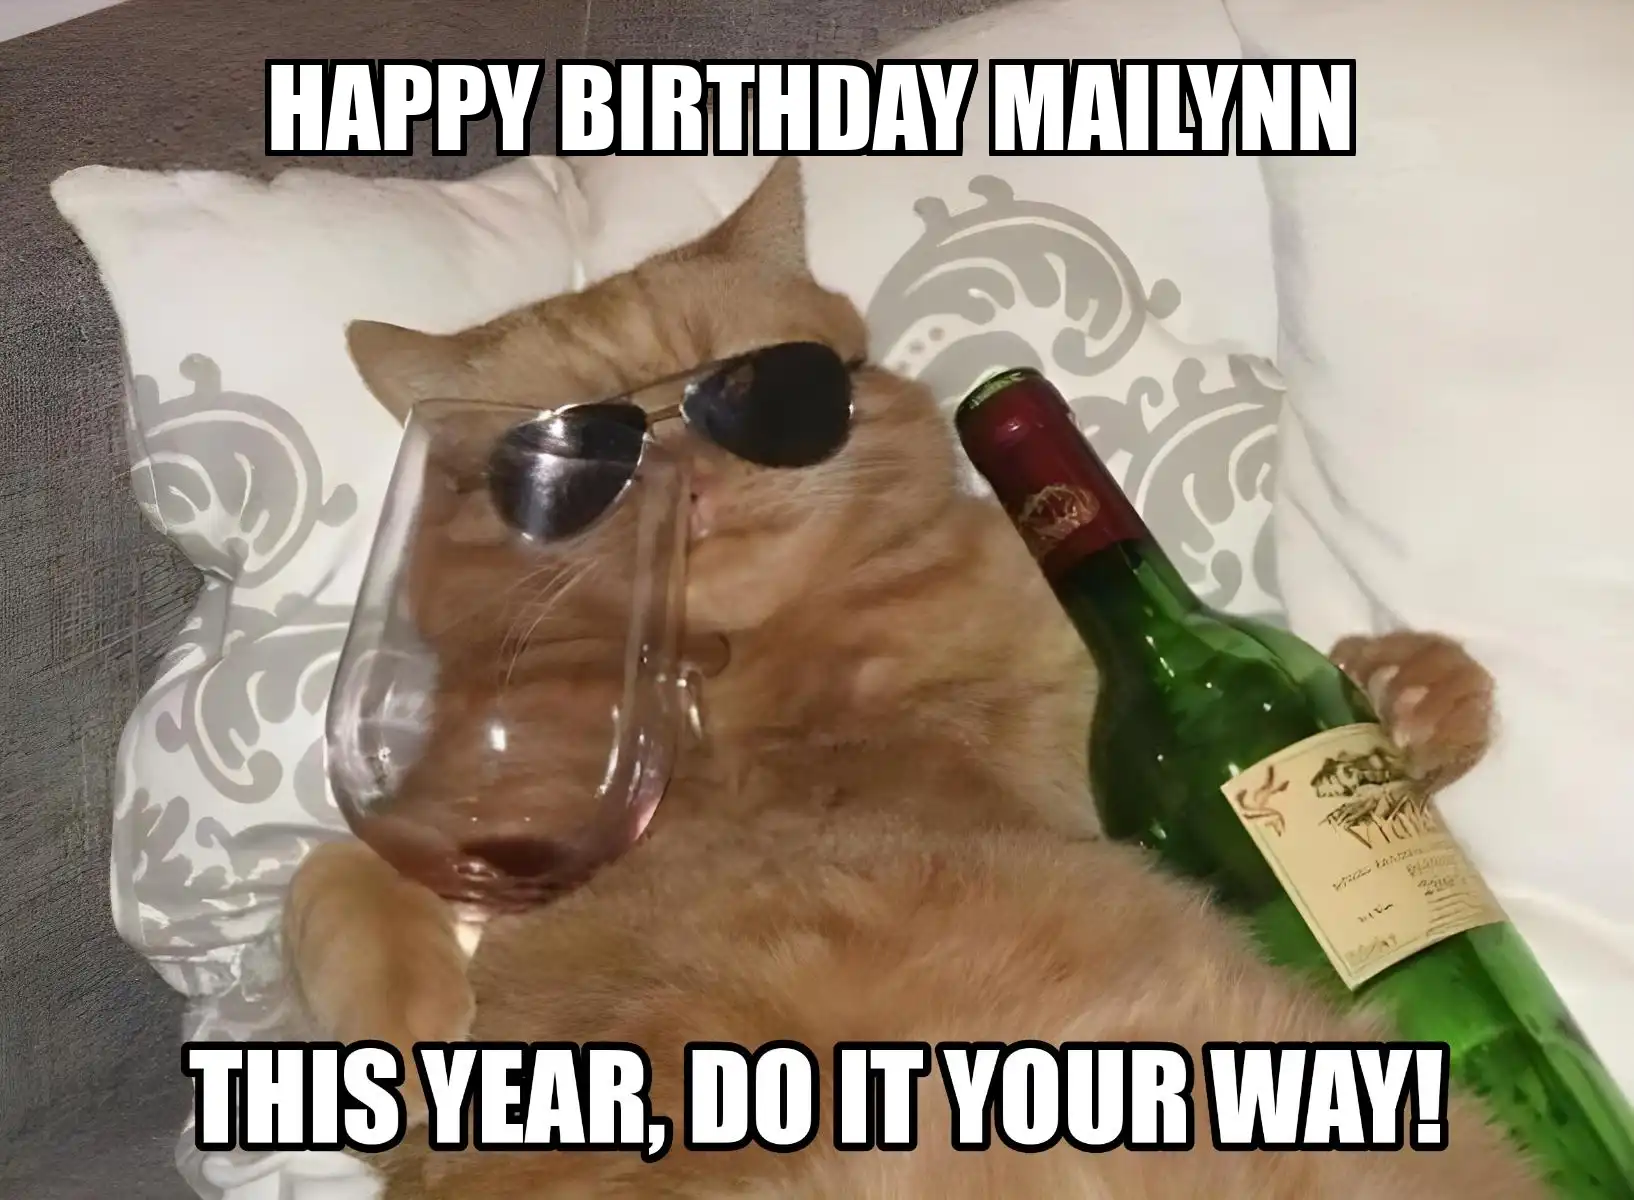 Happy Birthday Mailynn This Year Do It Your Way Meme